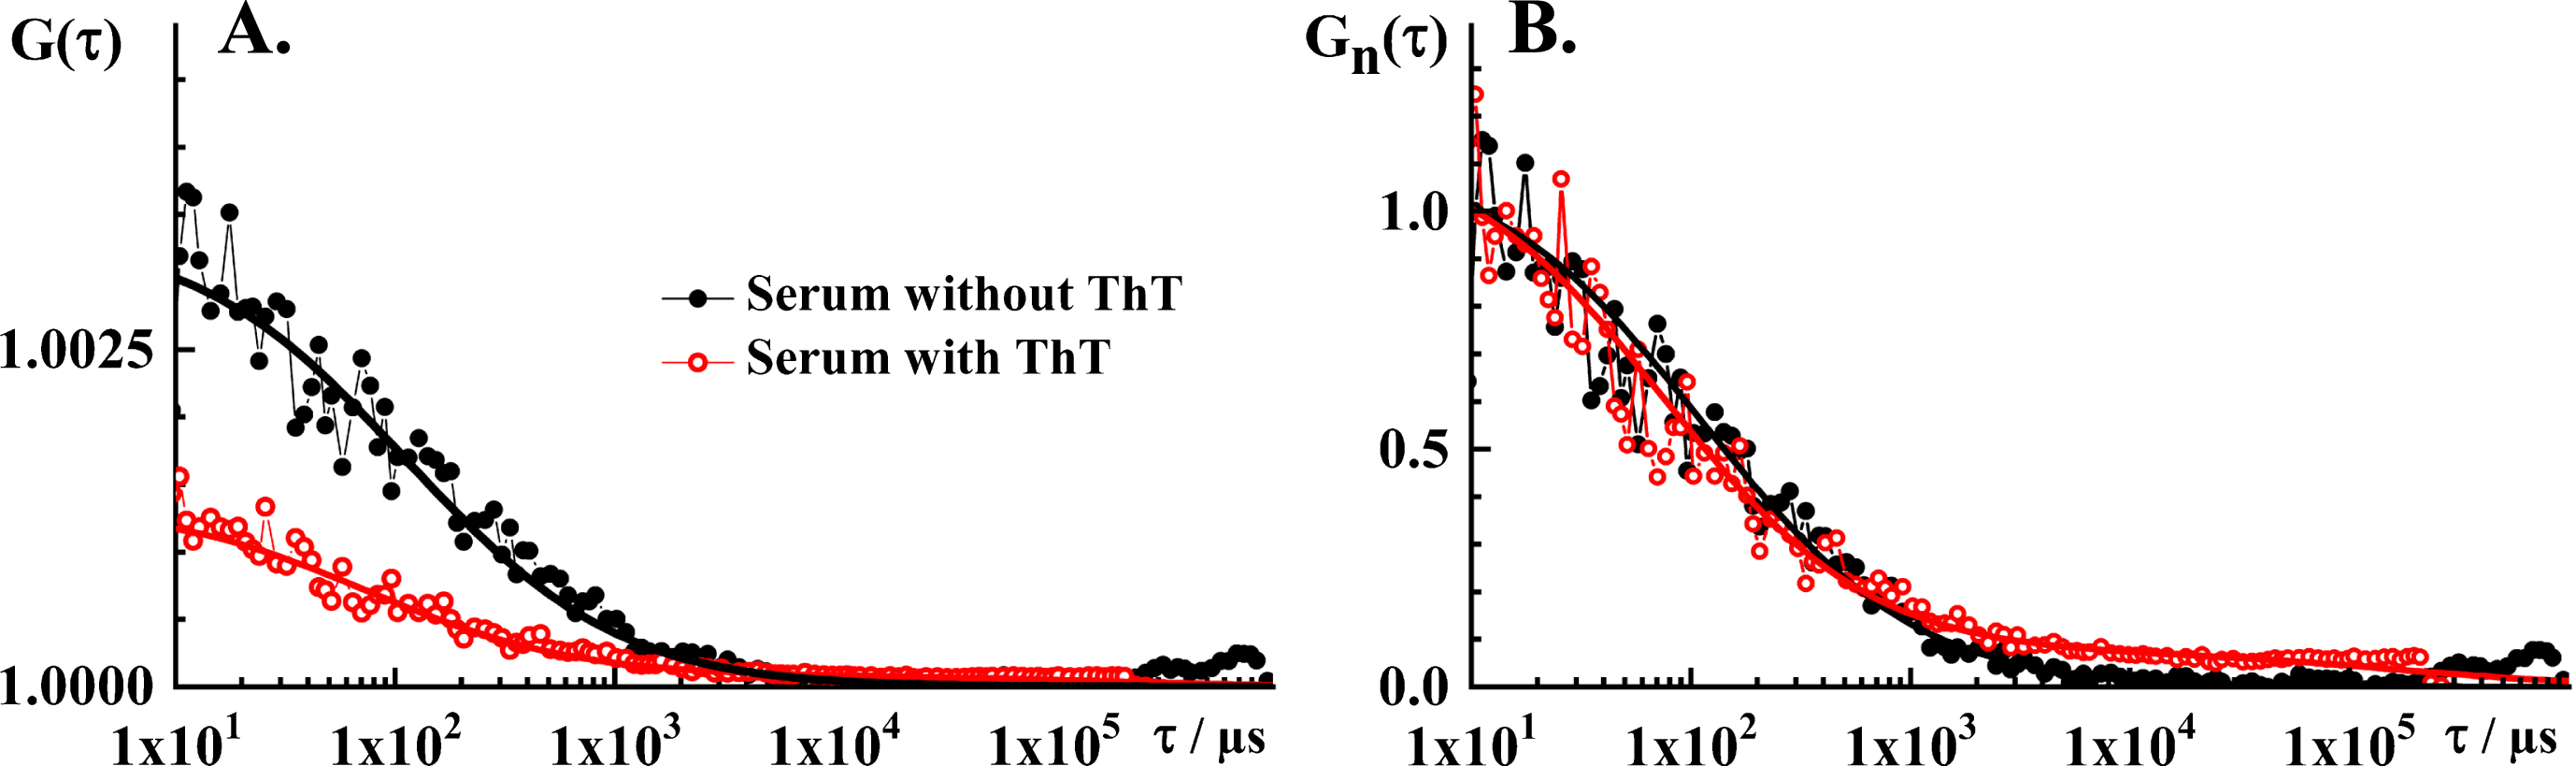 FCS analysis of serum autofluorescence and serum ThT fluorescence. A) Experimental tACC recorded in the blood serum without ThT (black dots) and with ThT (red circles), and the corresponding best fit using a theoretical autocorrelation function (AFt; solid lines). For measurements in the serum without ThT, the simplest theoretical model that could fit the experimental data was AF for free 3D diffusion without a triplet. The parameter values derived by fitting are: N = 300 and τD = 55 μm. The structure parameter was fixed at the value determined in calibration experiments, Sp = 5. For measurements in the serum with ThT, the simplest theoretical model that could fit the experimental data was AFt for free 3D diffusion of two components without triplet. The parameter values derived by fitting are: N = 750, τD1 = 40μs, τD2 = 100 ms, y1 = 0.94 and y2 = 0.06. The structure parameter was fixed at the value determined in calibration experiments, Sp = 5. B) Temporal autocorrelation curves shown in A. normalized to the same amplitude, G(τ) = 1 at τ= 10μs. Of note, the tACCs shown here are average of 10 consecutive 10 s measurements during which passage of individual nanoplaques was not observed, i.e., single event was not observed in any of the time series.